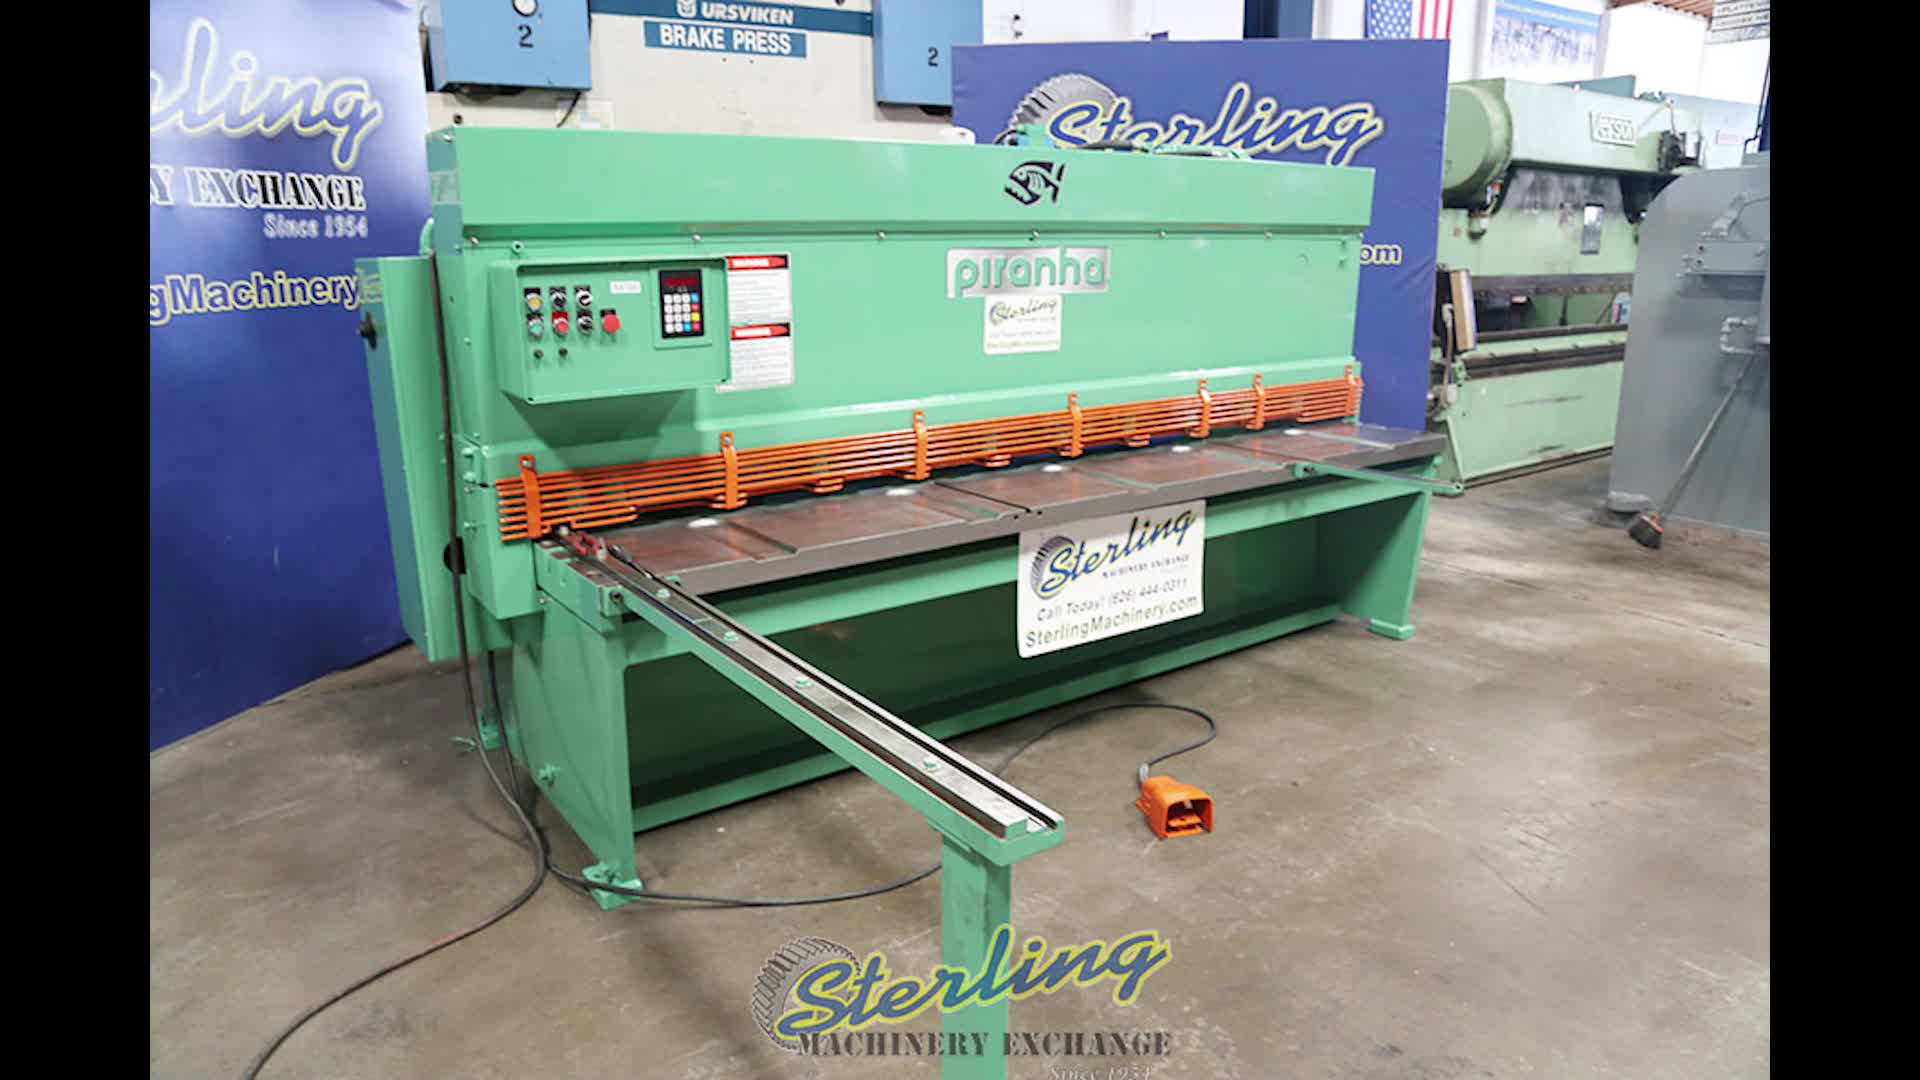 PIRANHA-1/4" x 10' Used Piranha Hydraulic Metal Cutting Shear, Mdl. 1/4" x 10', Square arm, Power Stroke Length Adjustment,  Electric Foot Pedal, Front Operated Power Back GaugeWith Indicator, #a4795-01